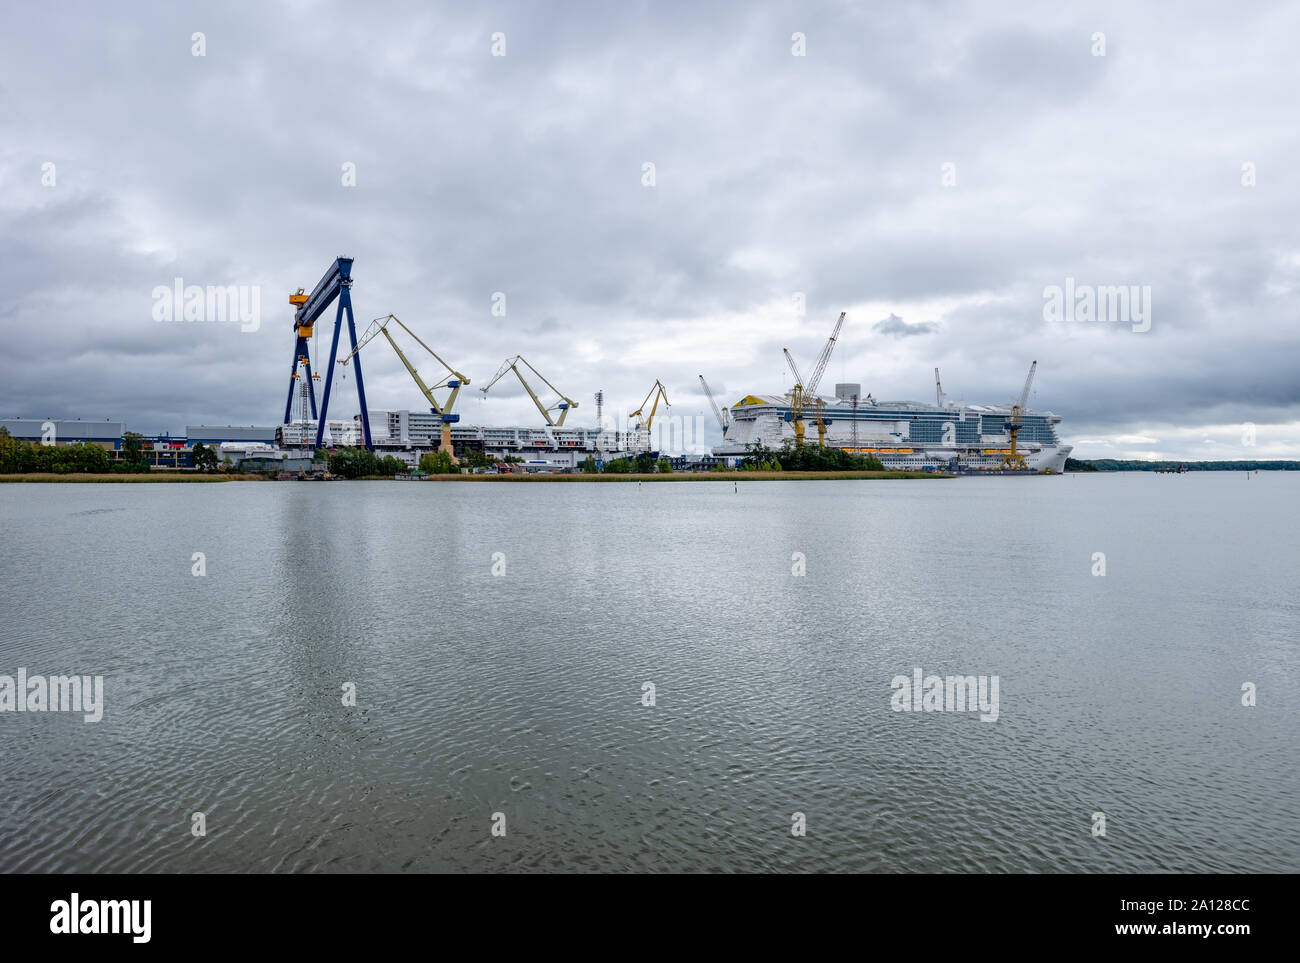 Raisio, Finland - September 21, 2019: Turku Shipyard was founded in 1737 and, today, it is one of the leading European shipbuilding companies. Stock Photo